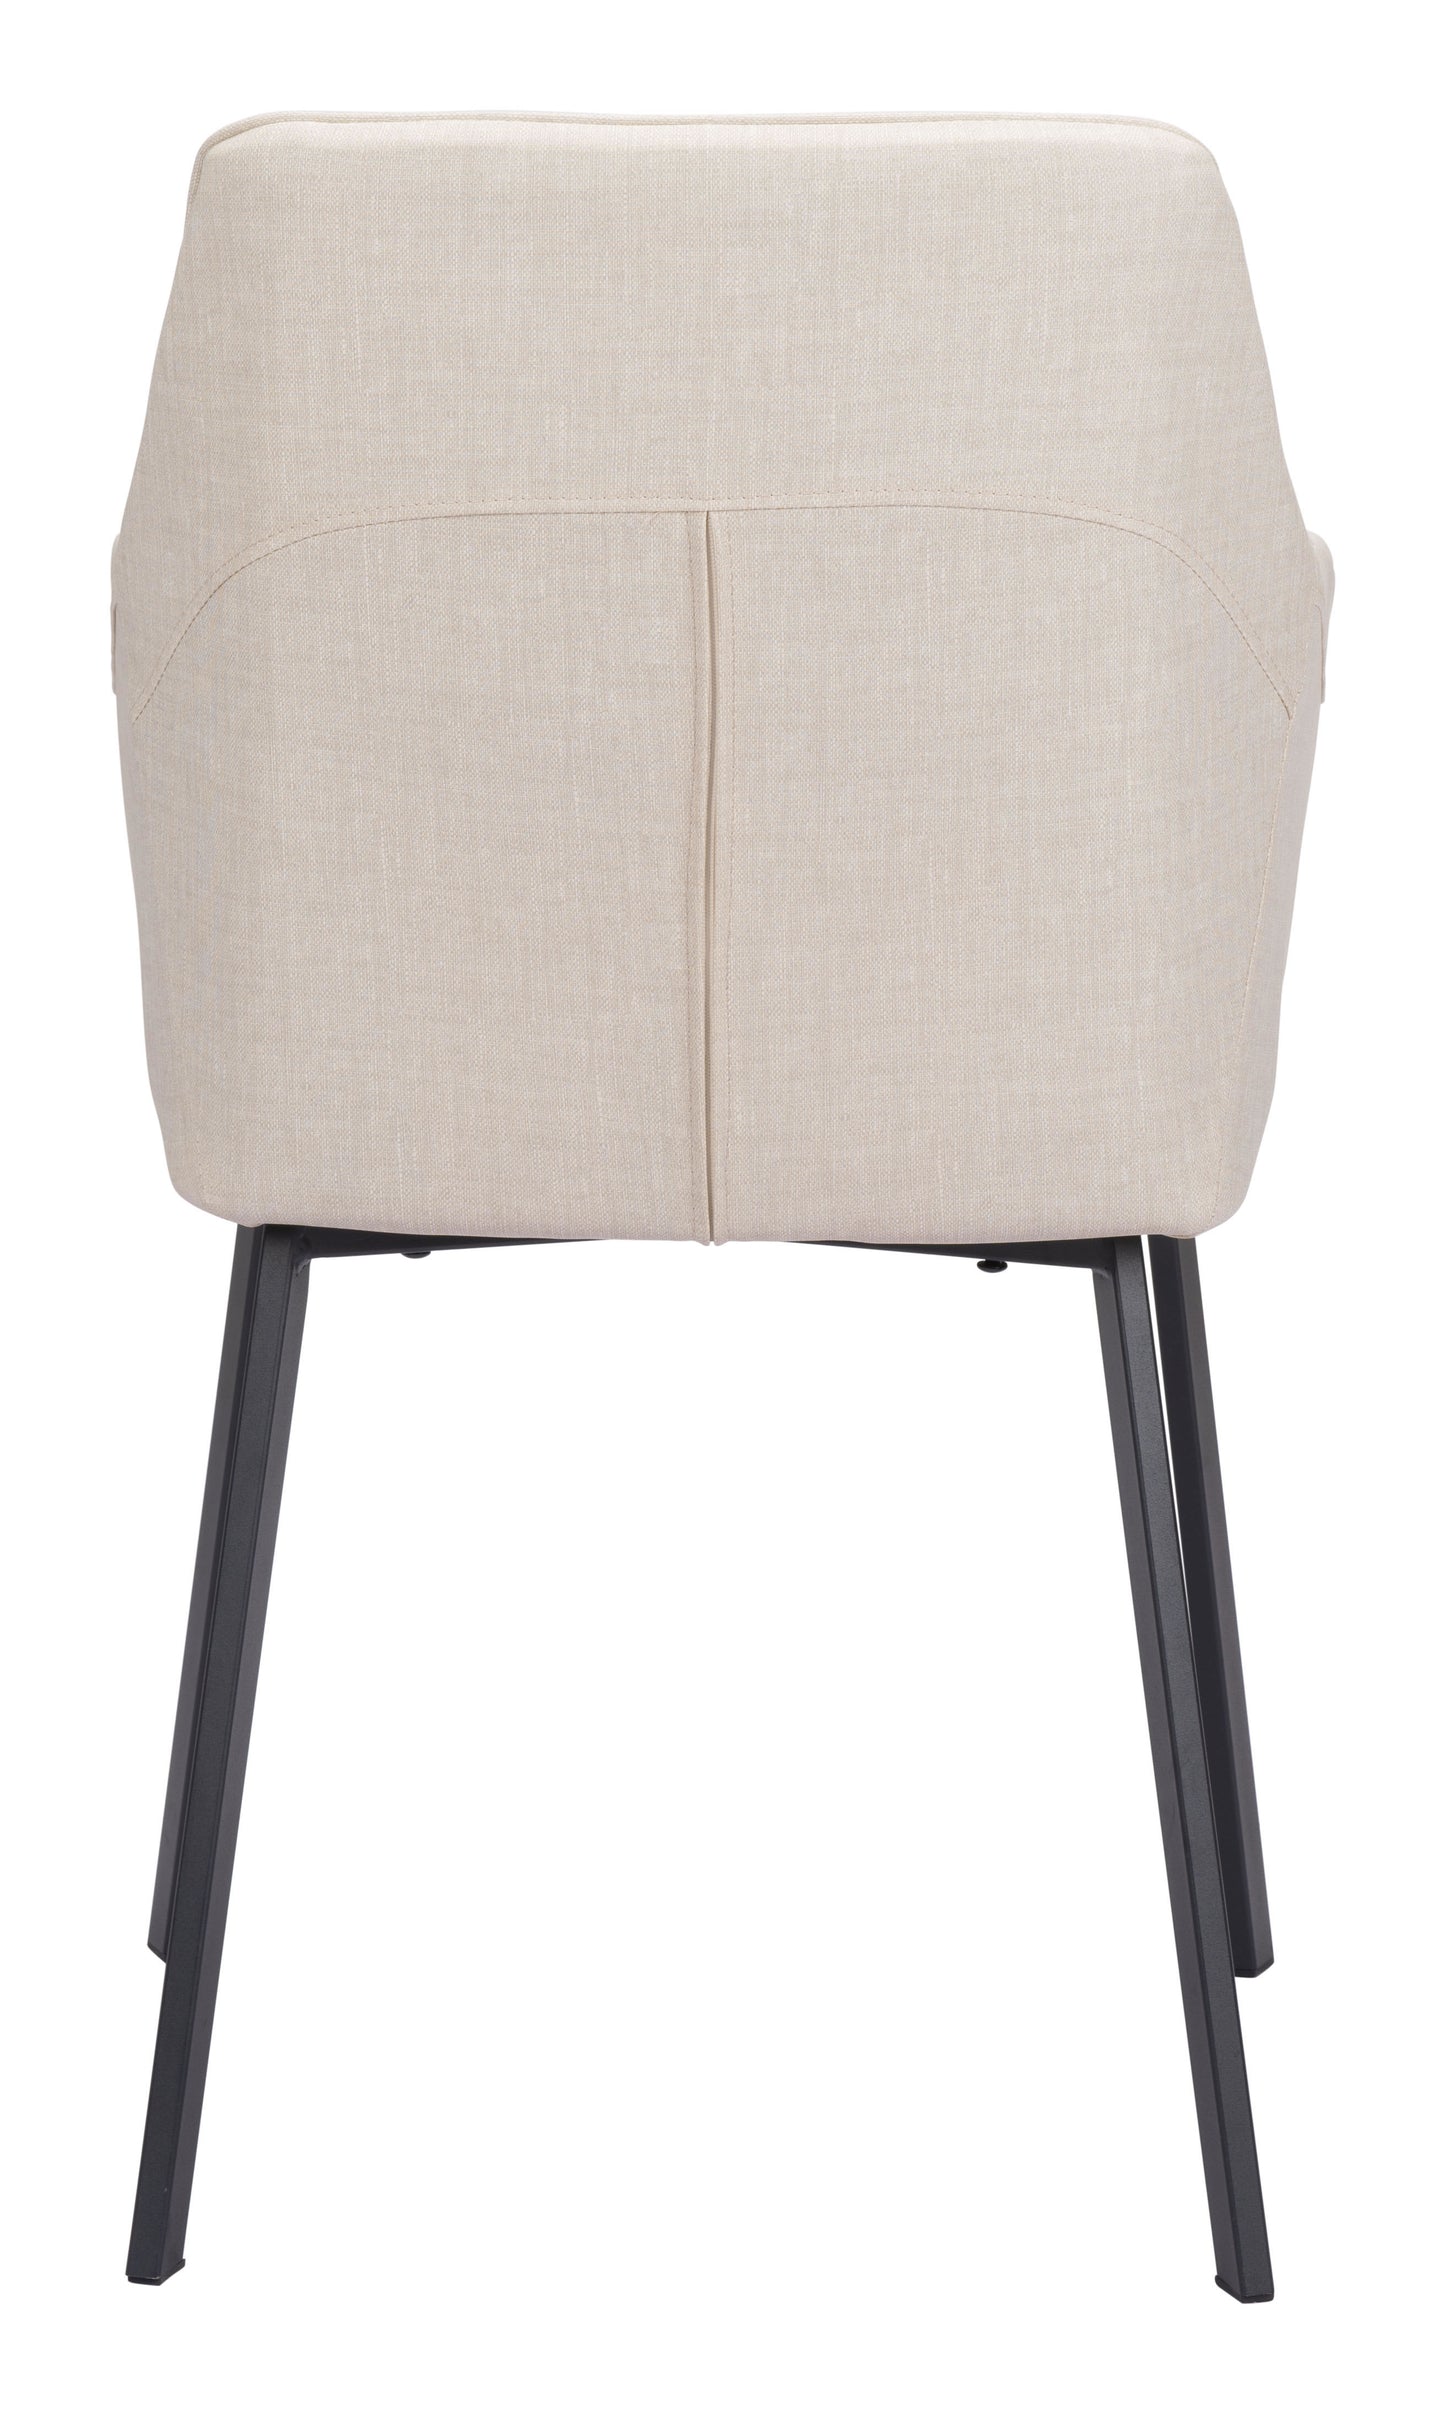 Adage Dining Chair Beige (Set of 2)